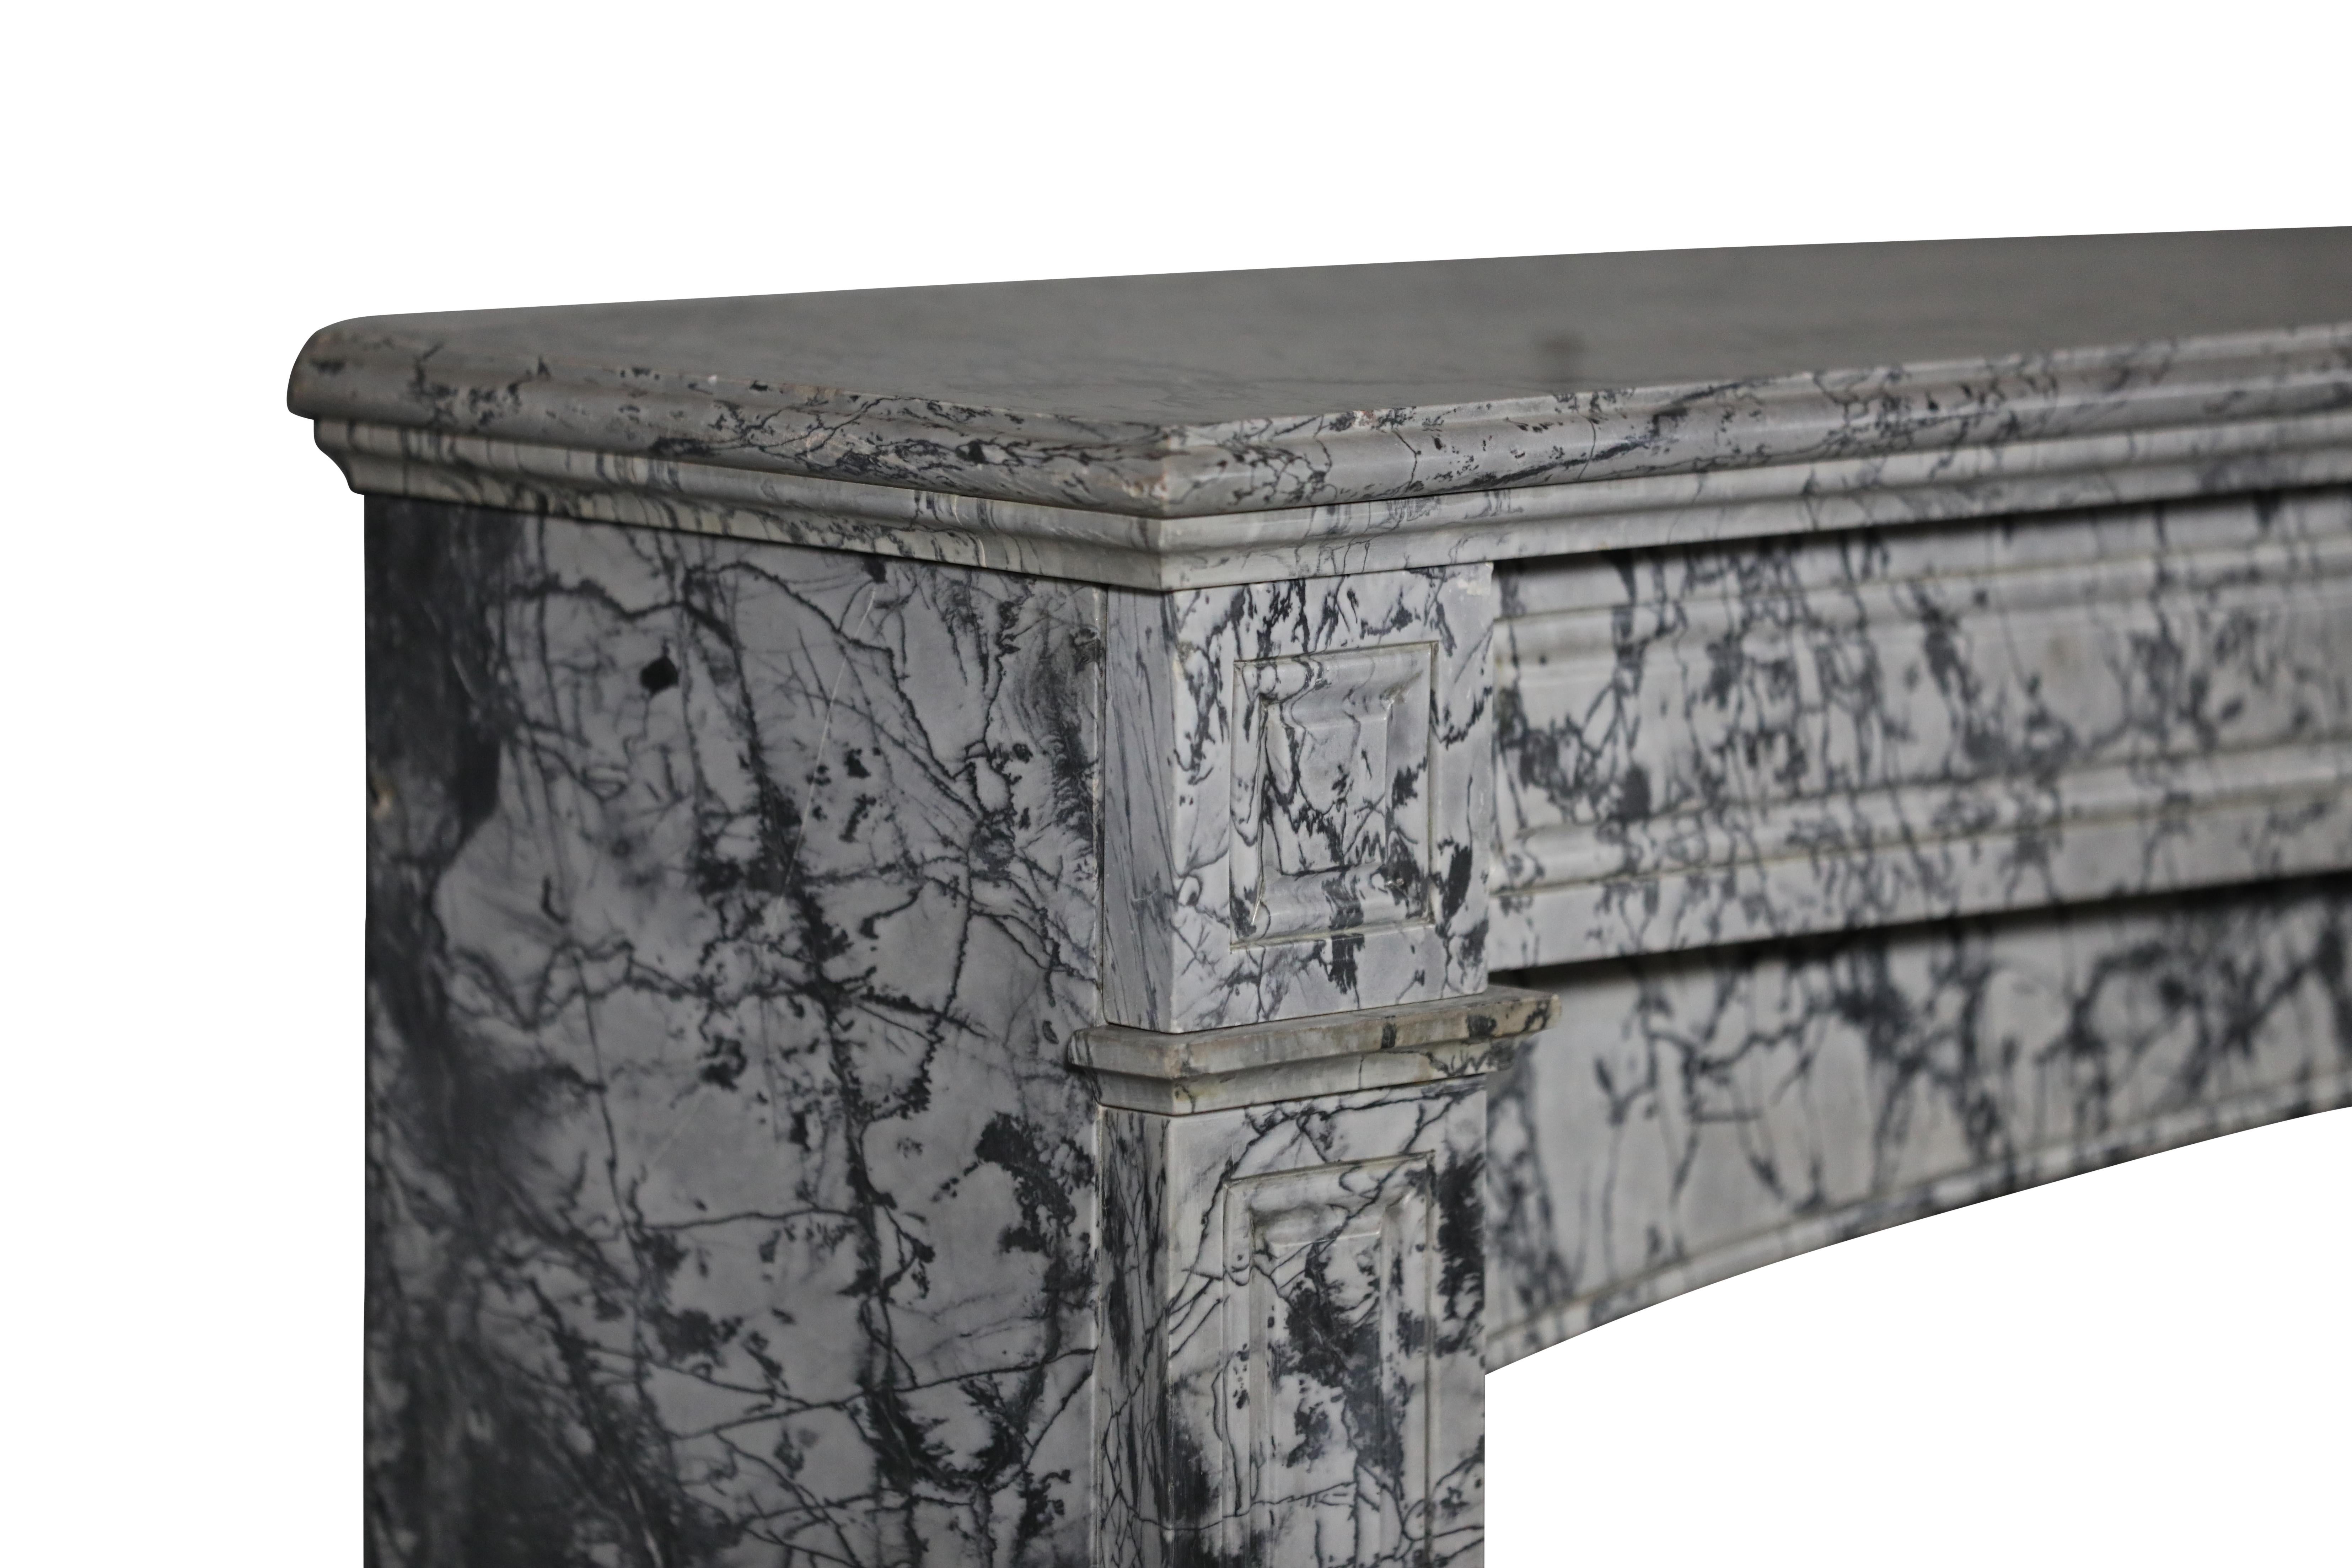 Bleu Turquin Marble Fireplace Surround In Great Condition For Timeless Design For Sale 6